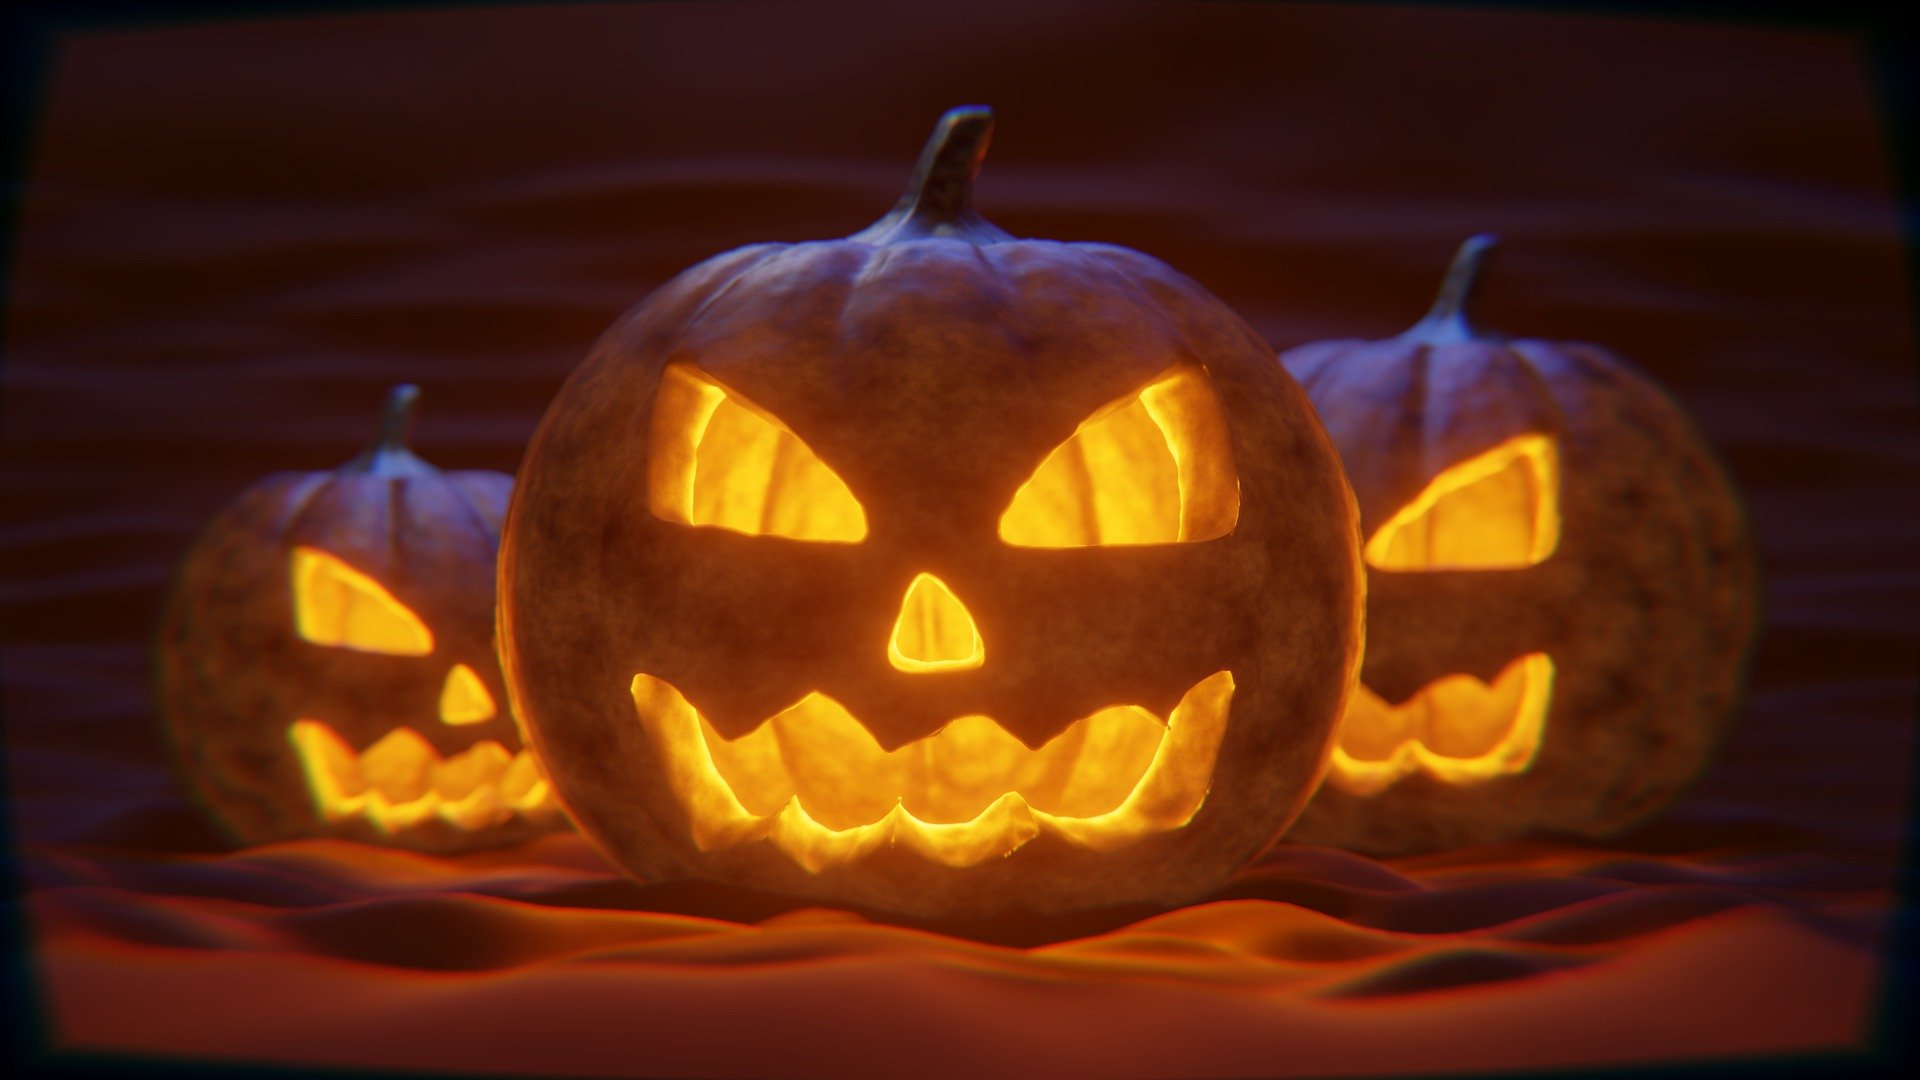 3 carved Halloween pumpkins against a dark background, illustrating the scary financial mistakes one could be making